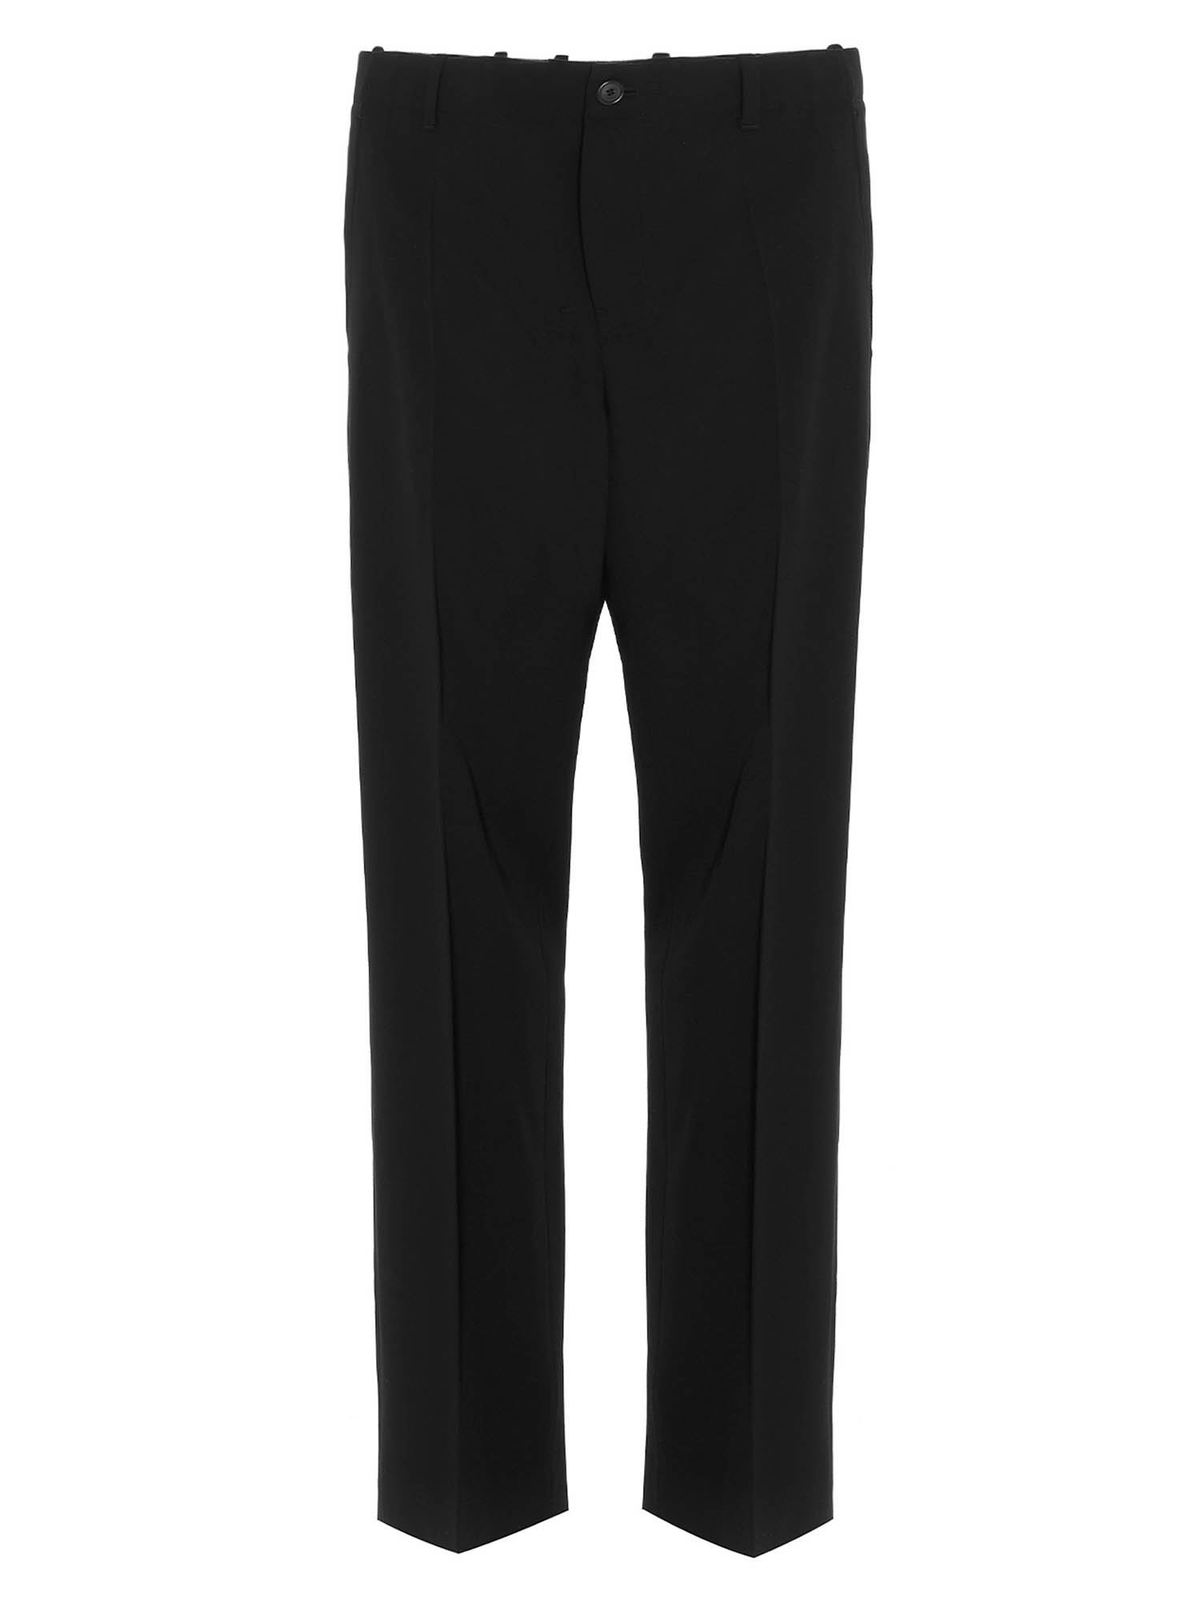 Loewe - Ironed crease pants in black - Tailored & Formal trousers ...